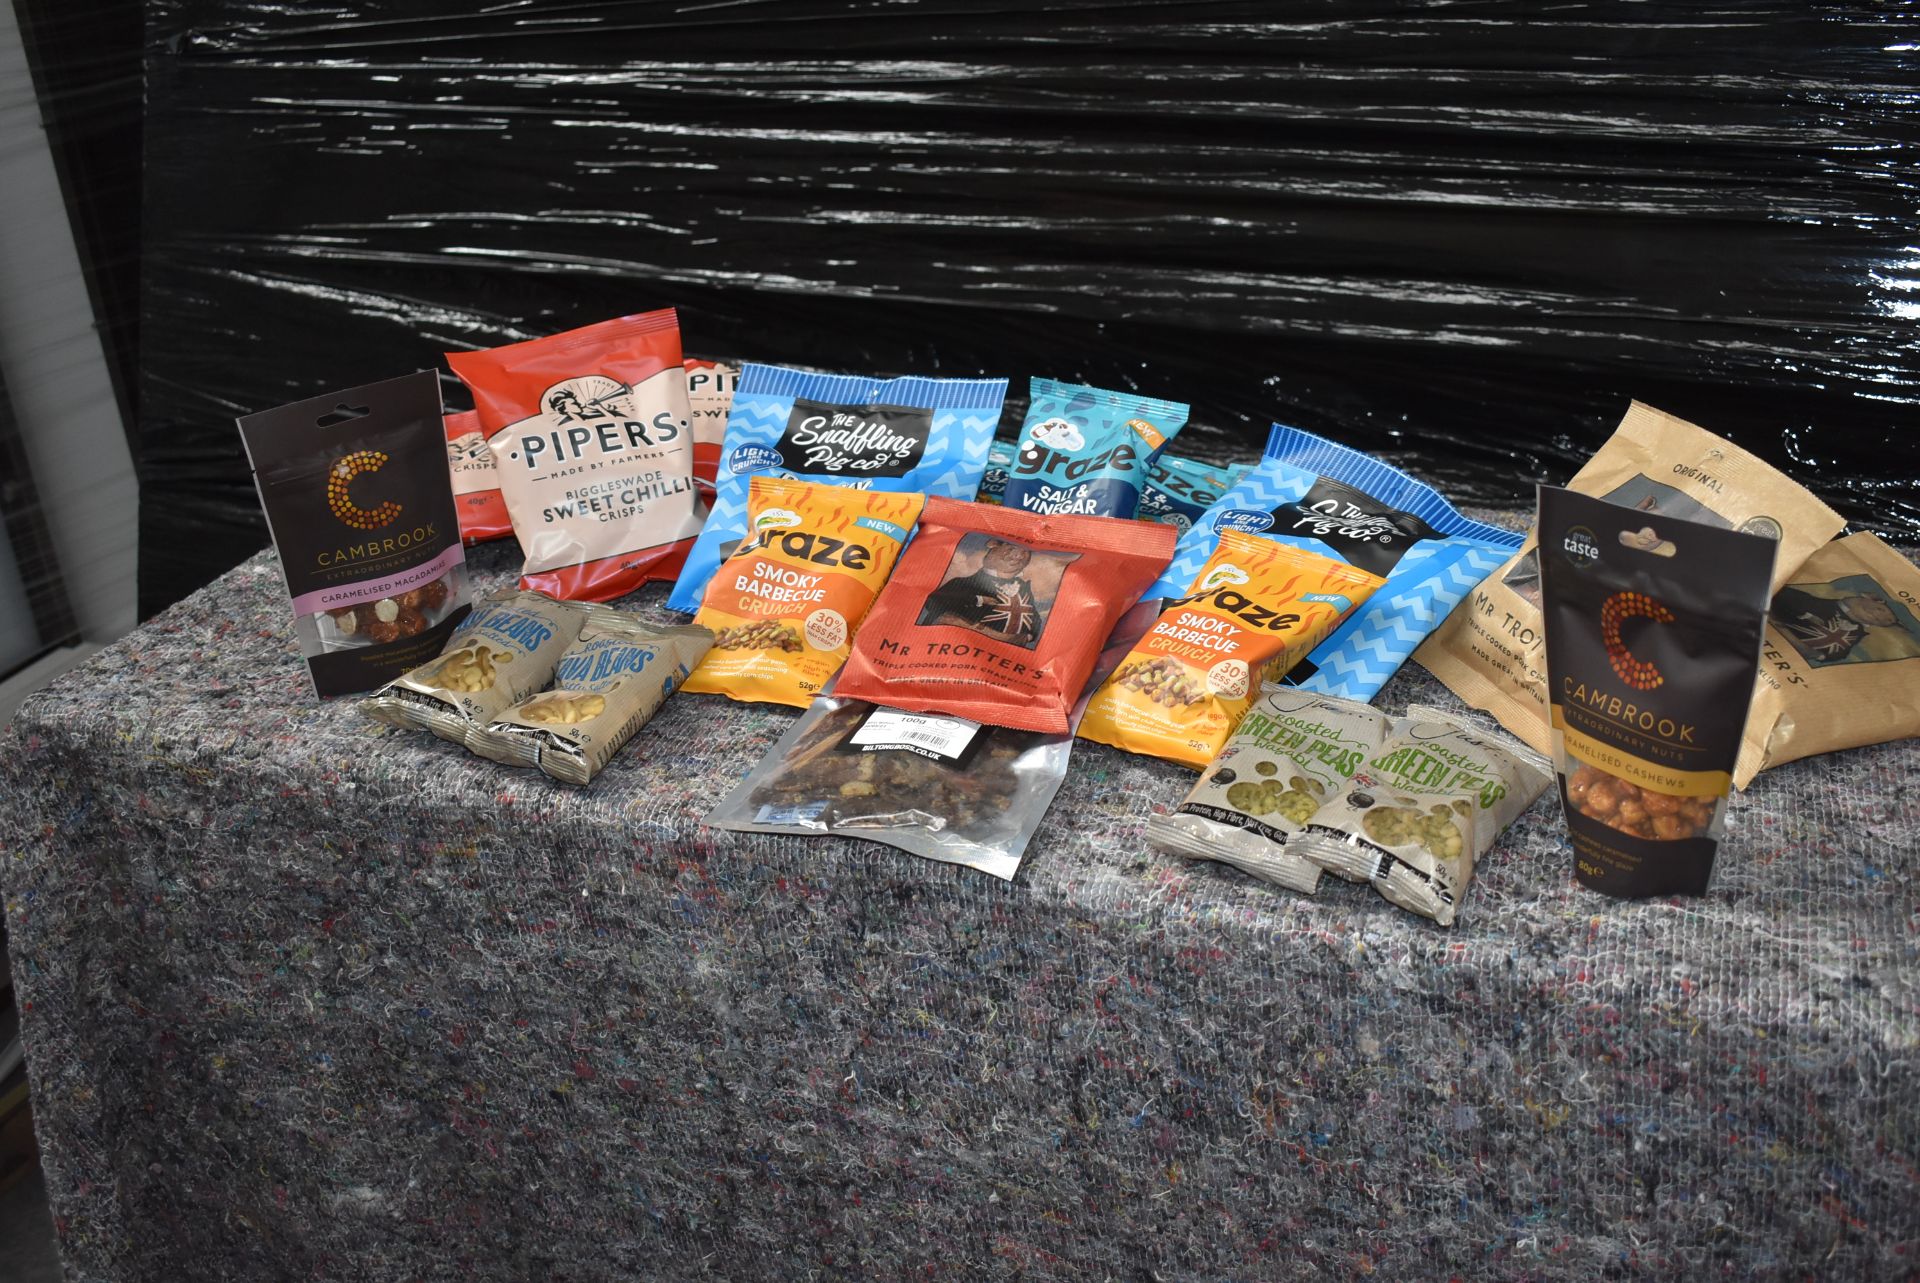 63 x Assorted Consumable Food Products Including Pipers Crisps, Graze Flavoured Peanuts, Mr. - Image 6 of 16